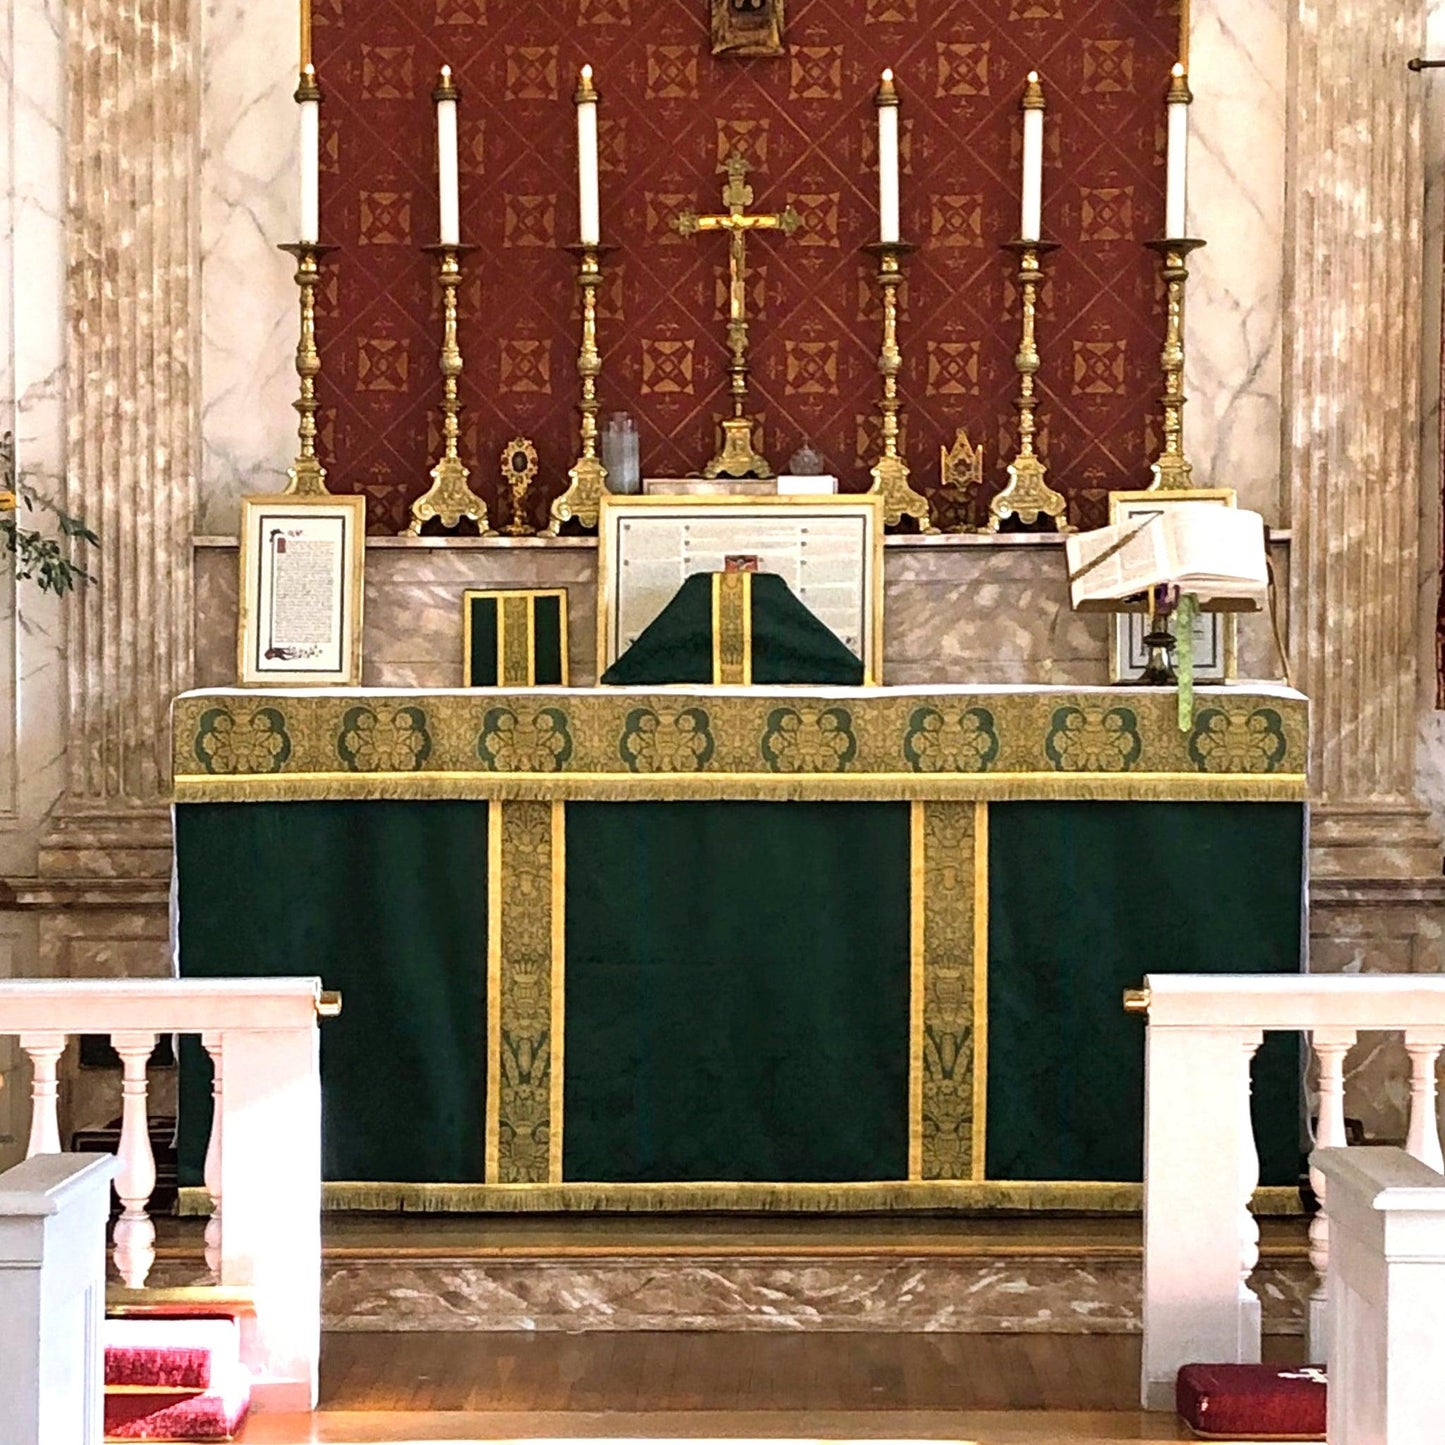 Altar Frontal in Green 'Comper Cathedral' and Superfrontal in Jasper 'Crevelli' - Watts & Co.